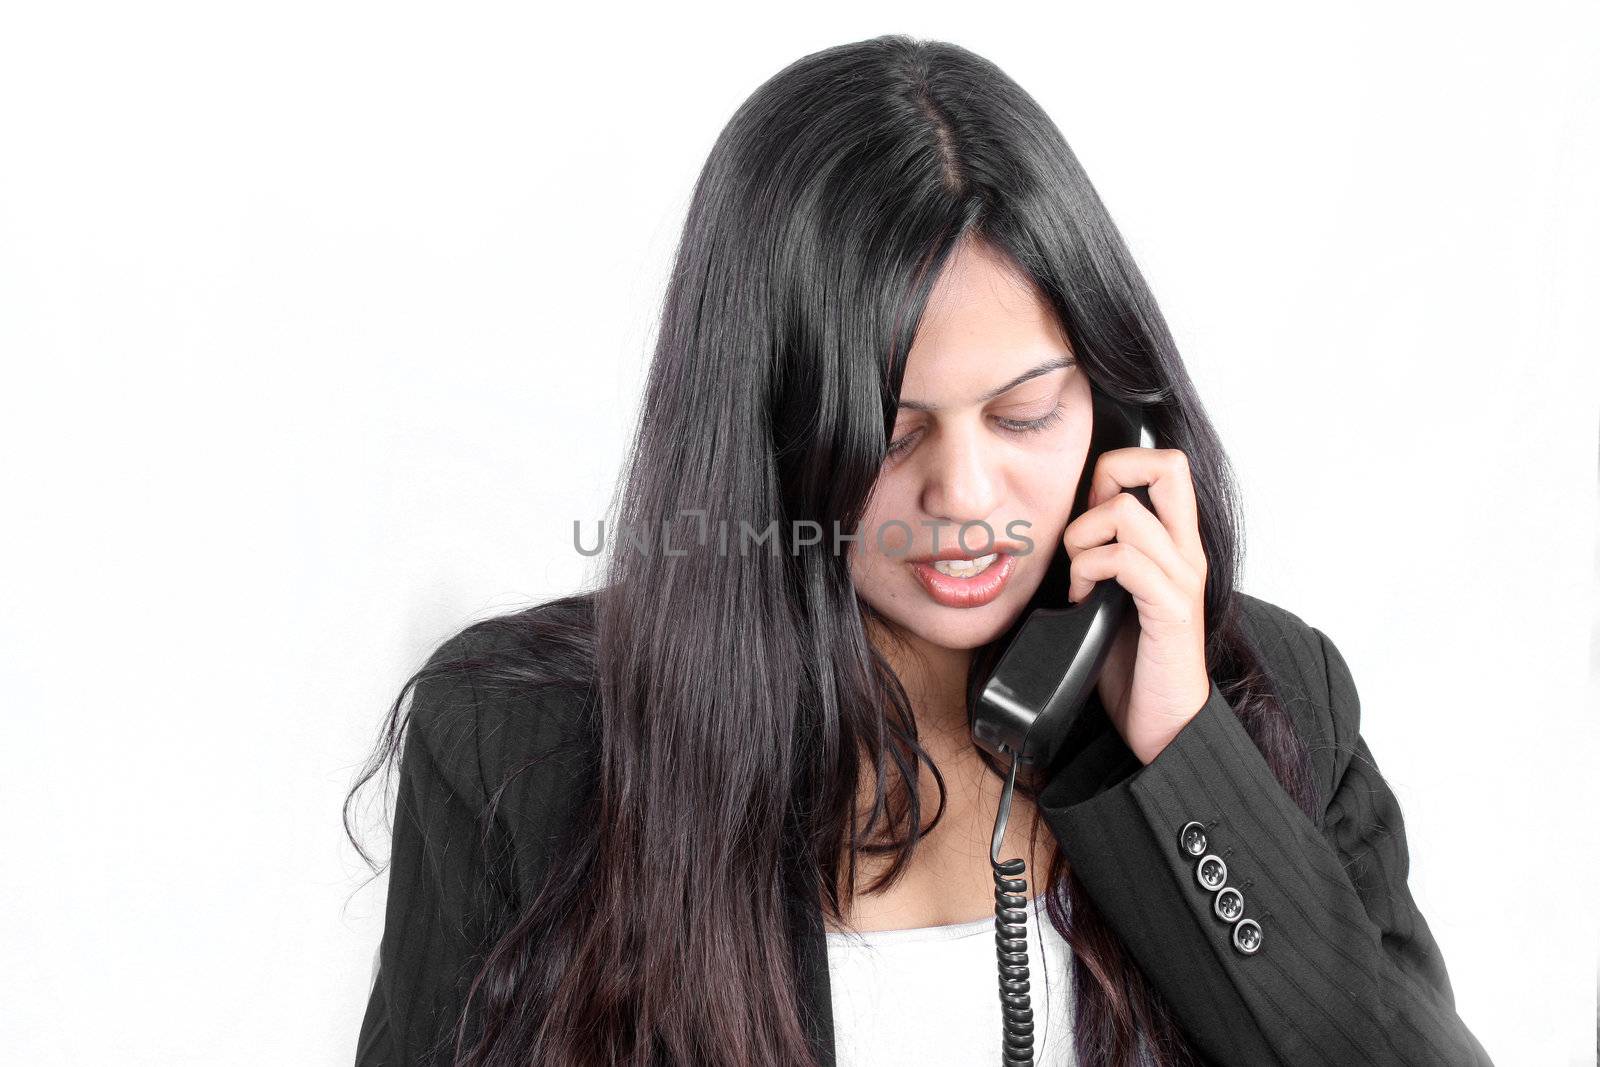 An Indian businesswoman talking on the telephone, on white studio background.